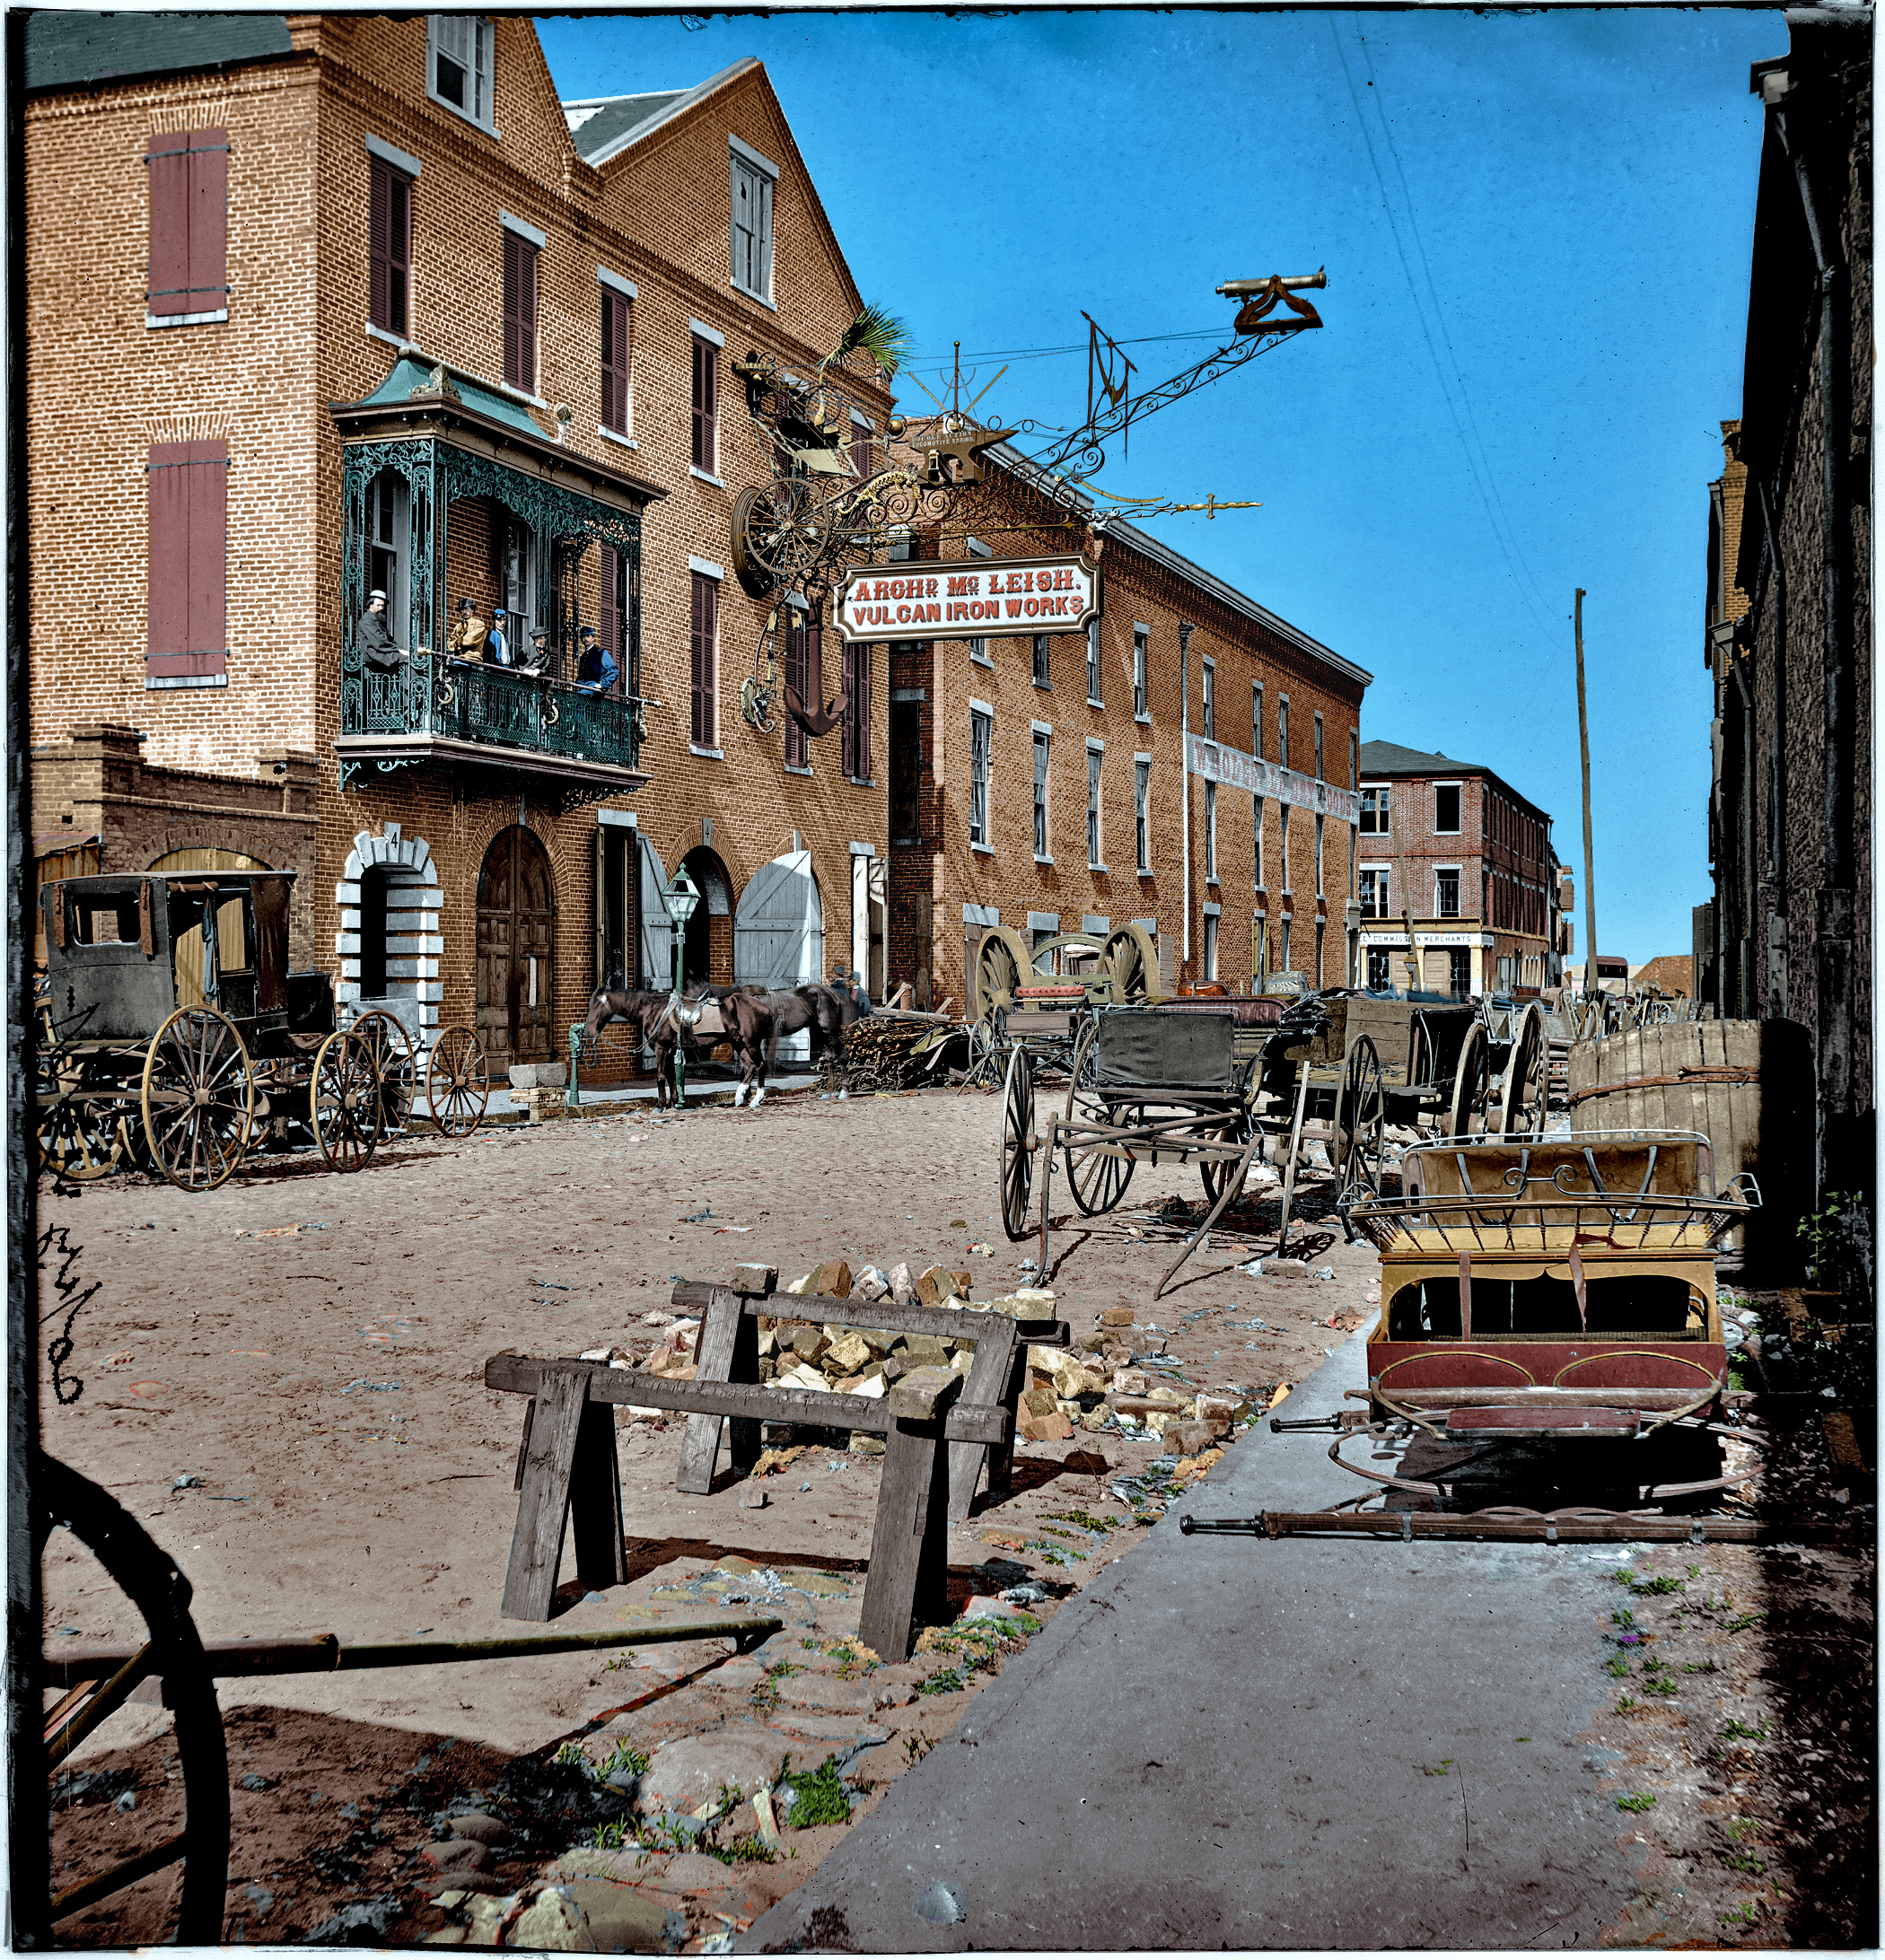 Colorized from this Shorpy original. This is my second attempt at colorizing a Civil War image. Since I had no color photos to base my color choices on, I had to rely on Civil War movie set photos and Civil War era antiques. To break the monotony of browns in this image, and as an eye candy, I made the right side wagon (which seems to be an abandoned higher quality coach) a more colorful one then the others. I wish I could see that crazy iron contraption in real life. That would really make my day. View full size.